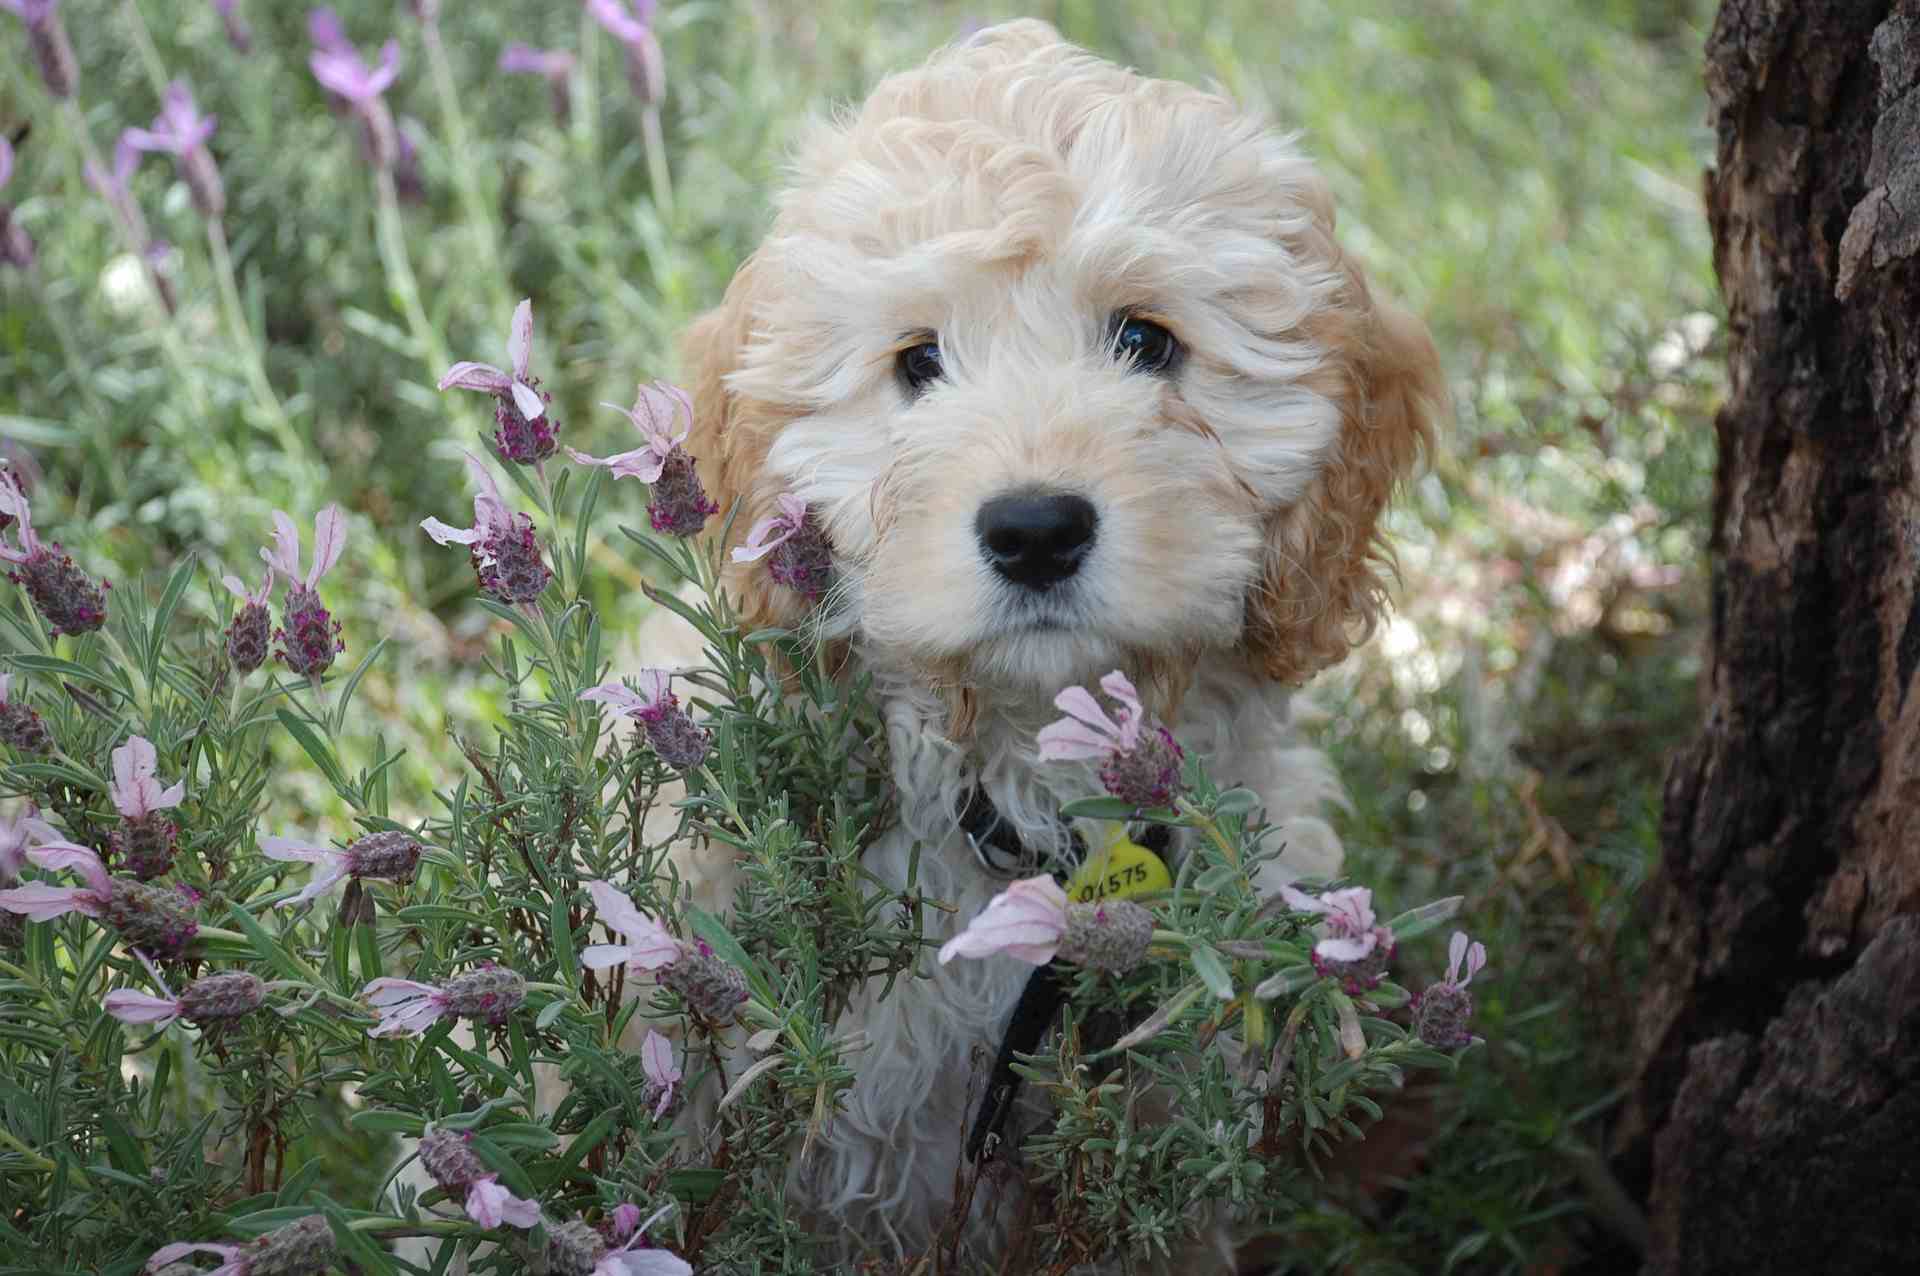 Small dog sitting in flowers